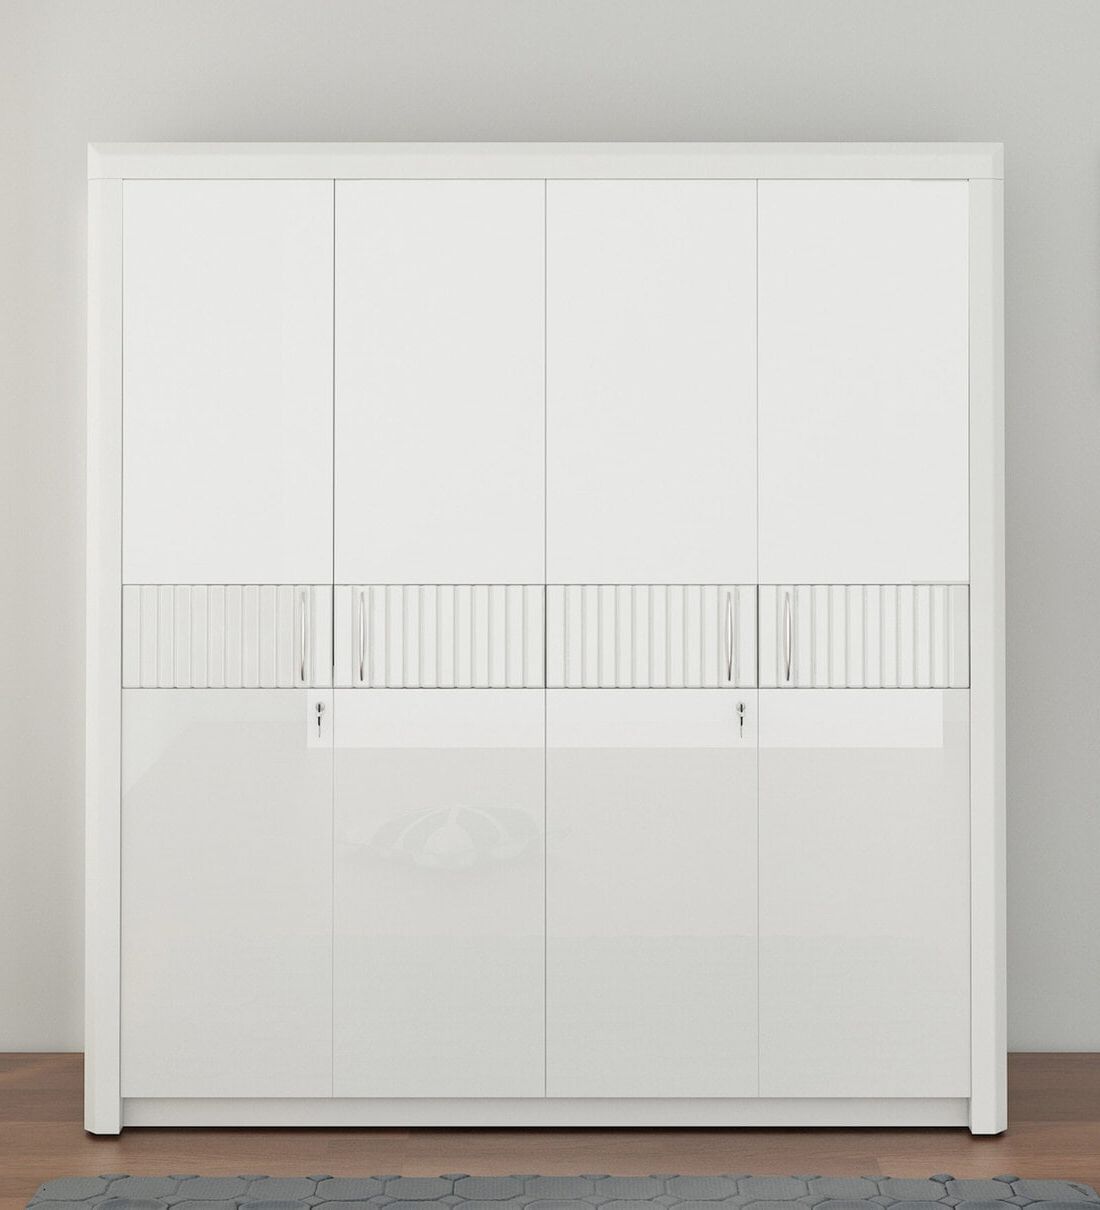 [%buy Kosmo Arctic 4 Door Wardrobe In High Gloss White Finish At 31% Off Spacewood | Pepperfry Inside Best And Newest Arctic White Wardrobes|arctic White Wardrobes With Regard To Most Up To Date Buy Kosmo Arctic 4 Door Wardrobe In High Gloss White Finish At 31% Off Spacewood | Pepperfry|2017 Arctic White Wardrobes Regarding Buy Kosmo Arctic 4 Door Wardrobe In High Gloss White Finish At 31% Off Spacewood | Pepperfry|favorite Buy Kosmo Arctic 4 Door Wardrobe In High Gloss White Finish At 31% Off Spacewood | Pepperfry Regarding Arctic White Wardrobes%] (Photo 10 of 10)